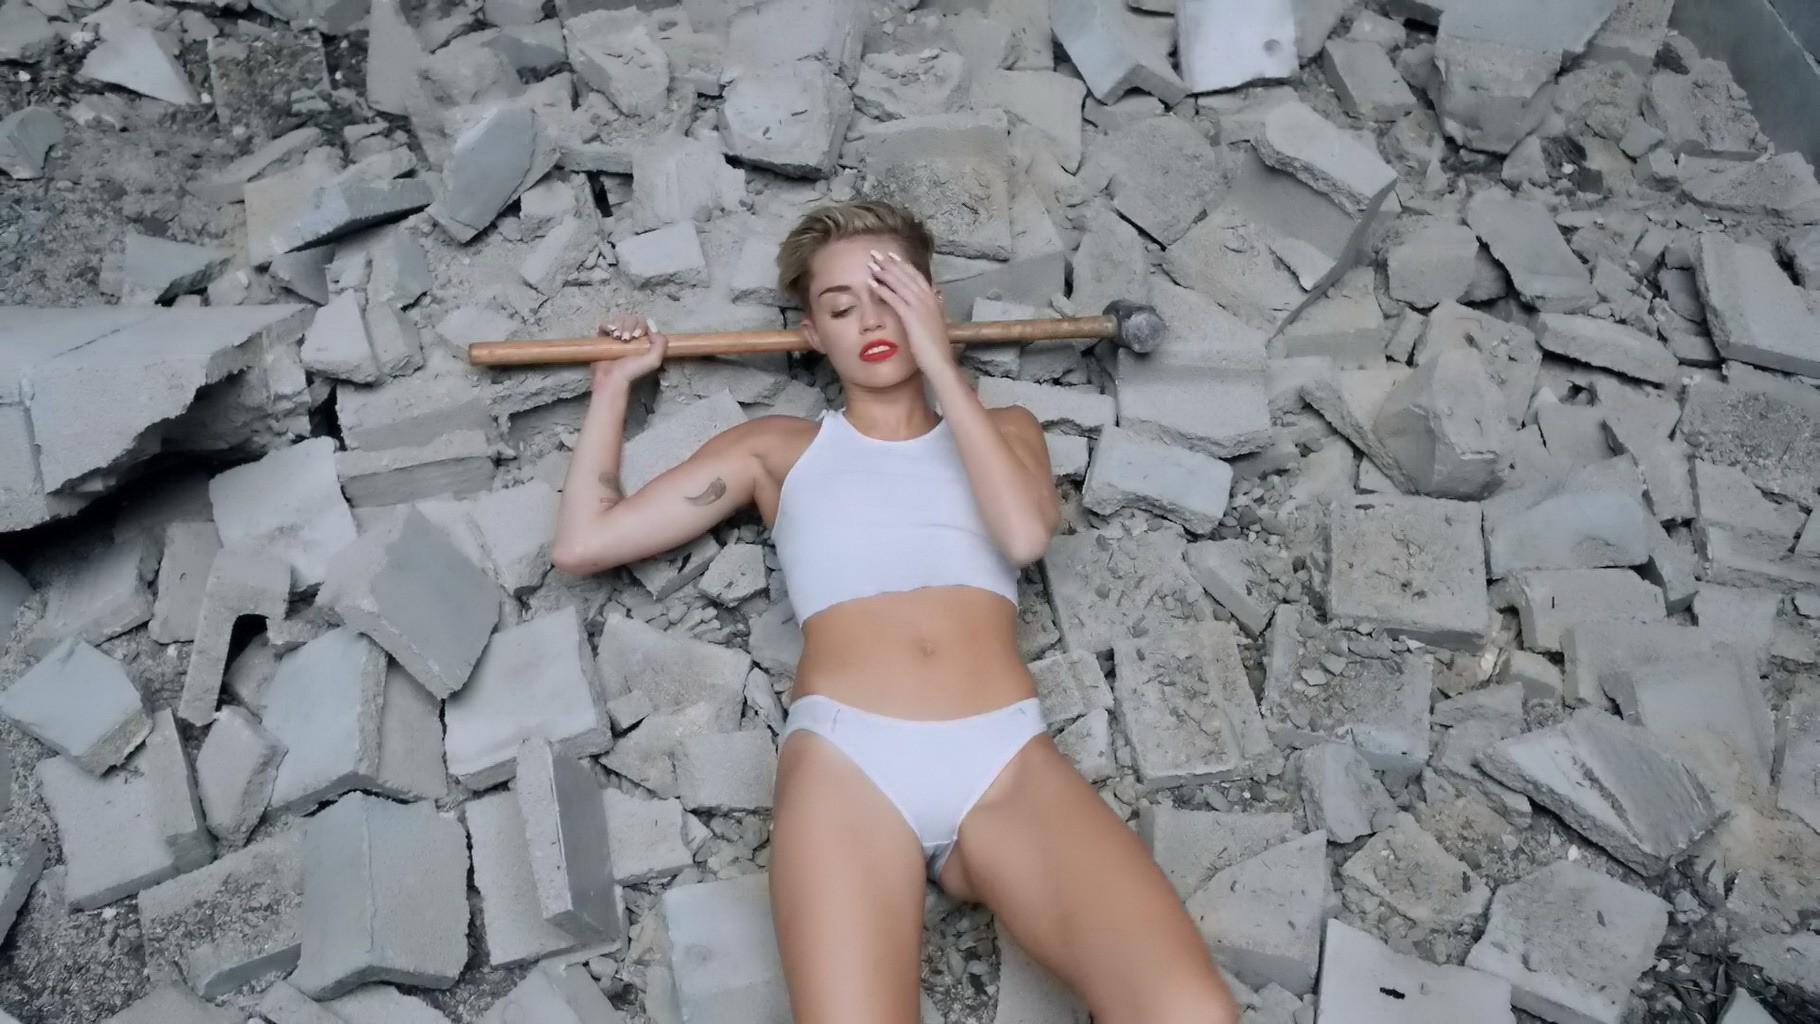 Miley Cyrus shows off her fully naked body while filming Wrecking Ball music vid #75219388